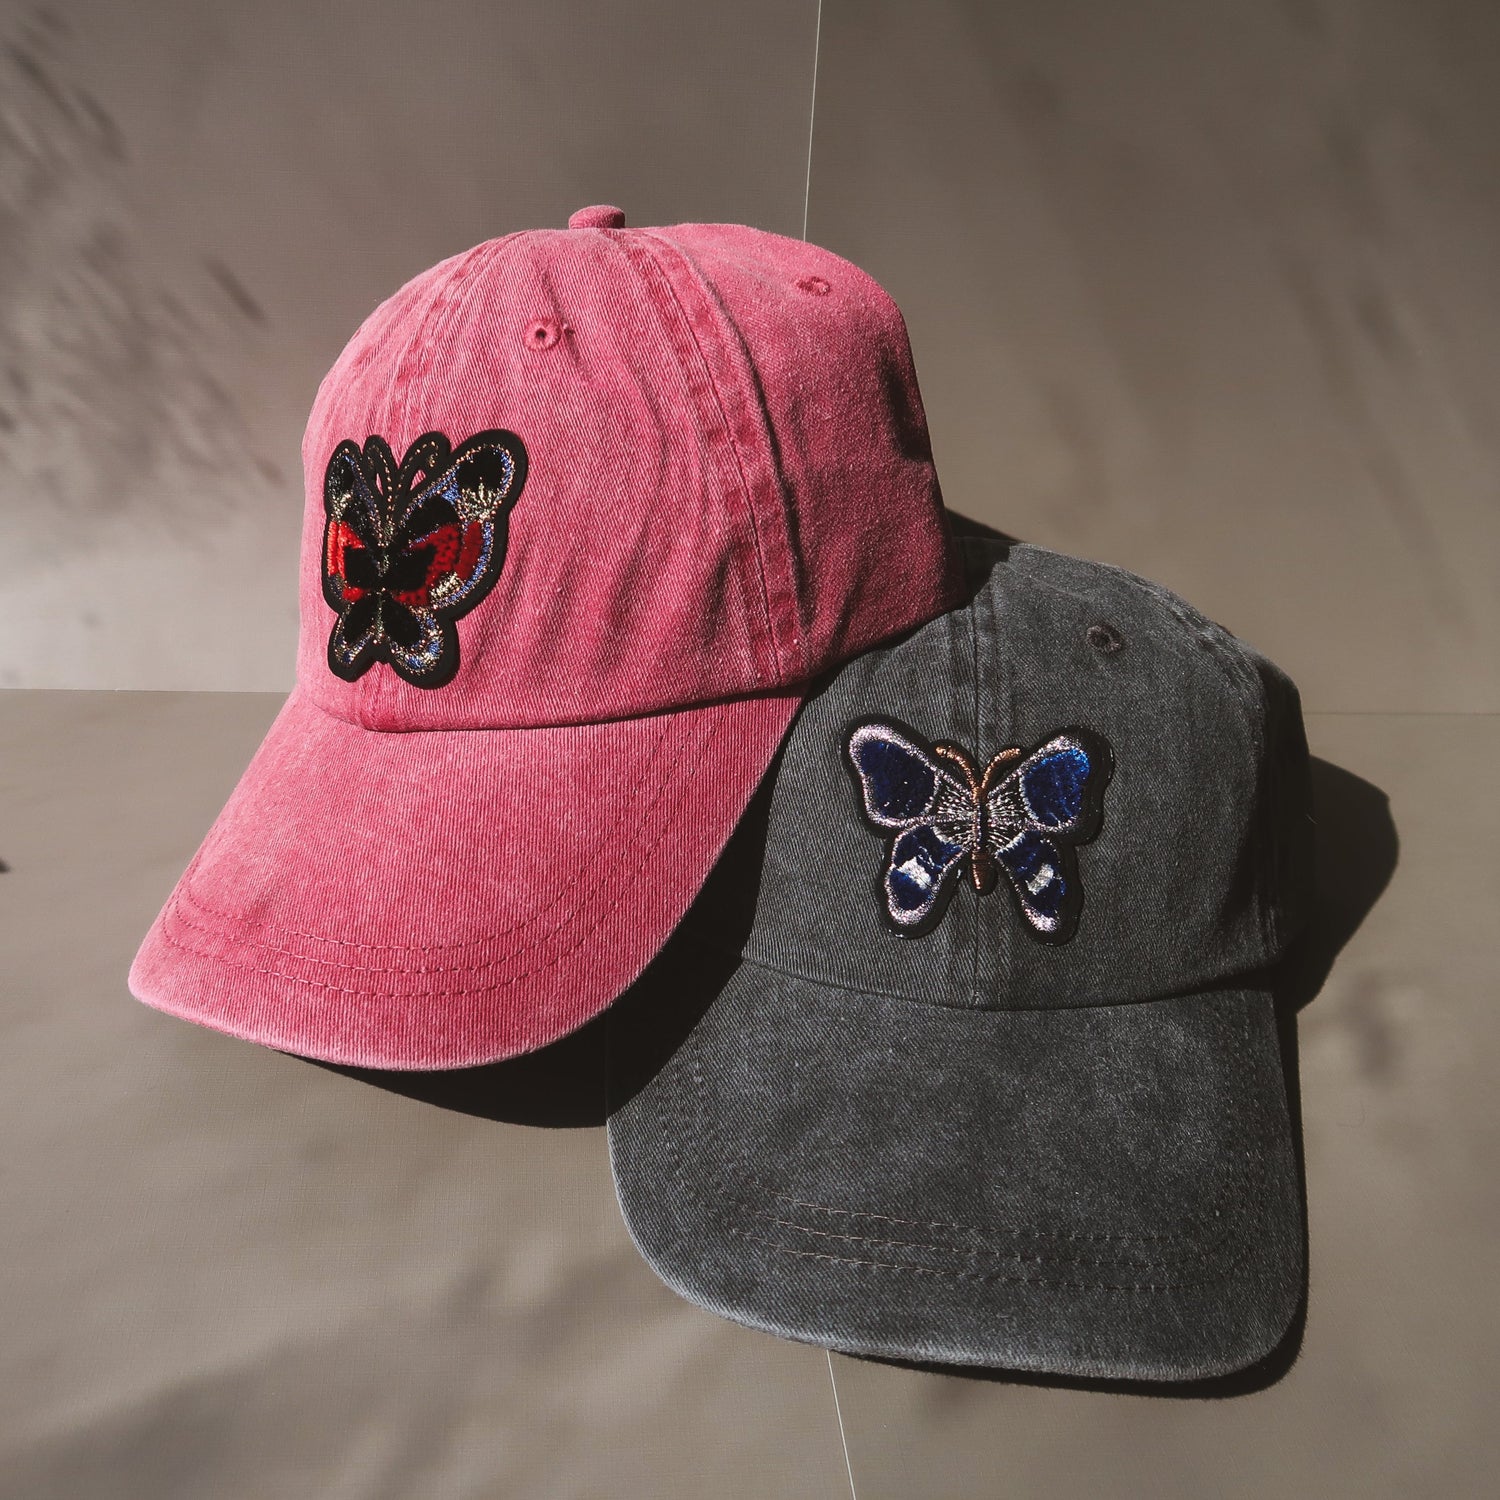 The Butterfly Baseball Cap is an essential washed cotton-twill baseball cap in vintage red. The perfect hat to elevate any casual look, whether running for coffee or any everyday adventure. #baseballcapforwomen #butterflybaseballcap #redbaseballcap #womenbaseballcap #womenhat #butterflyhat